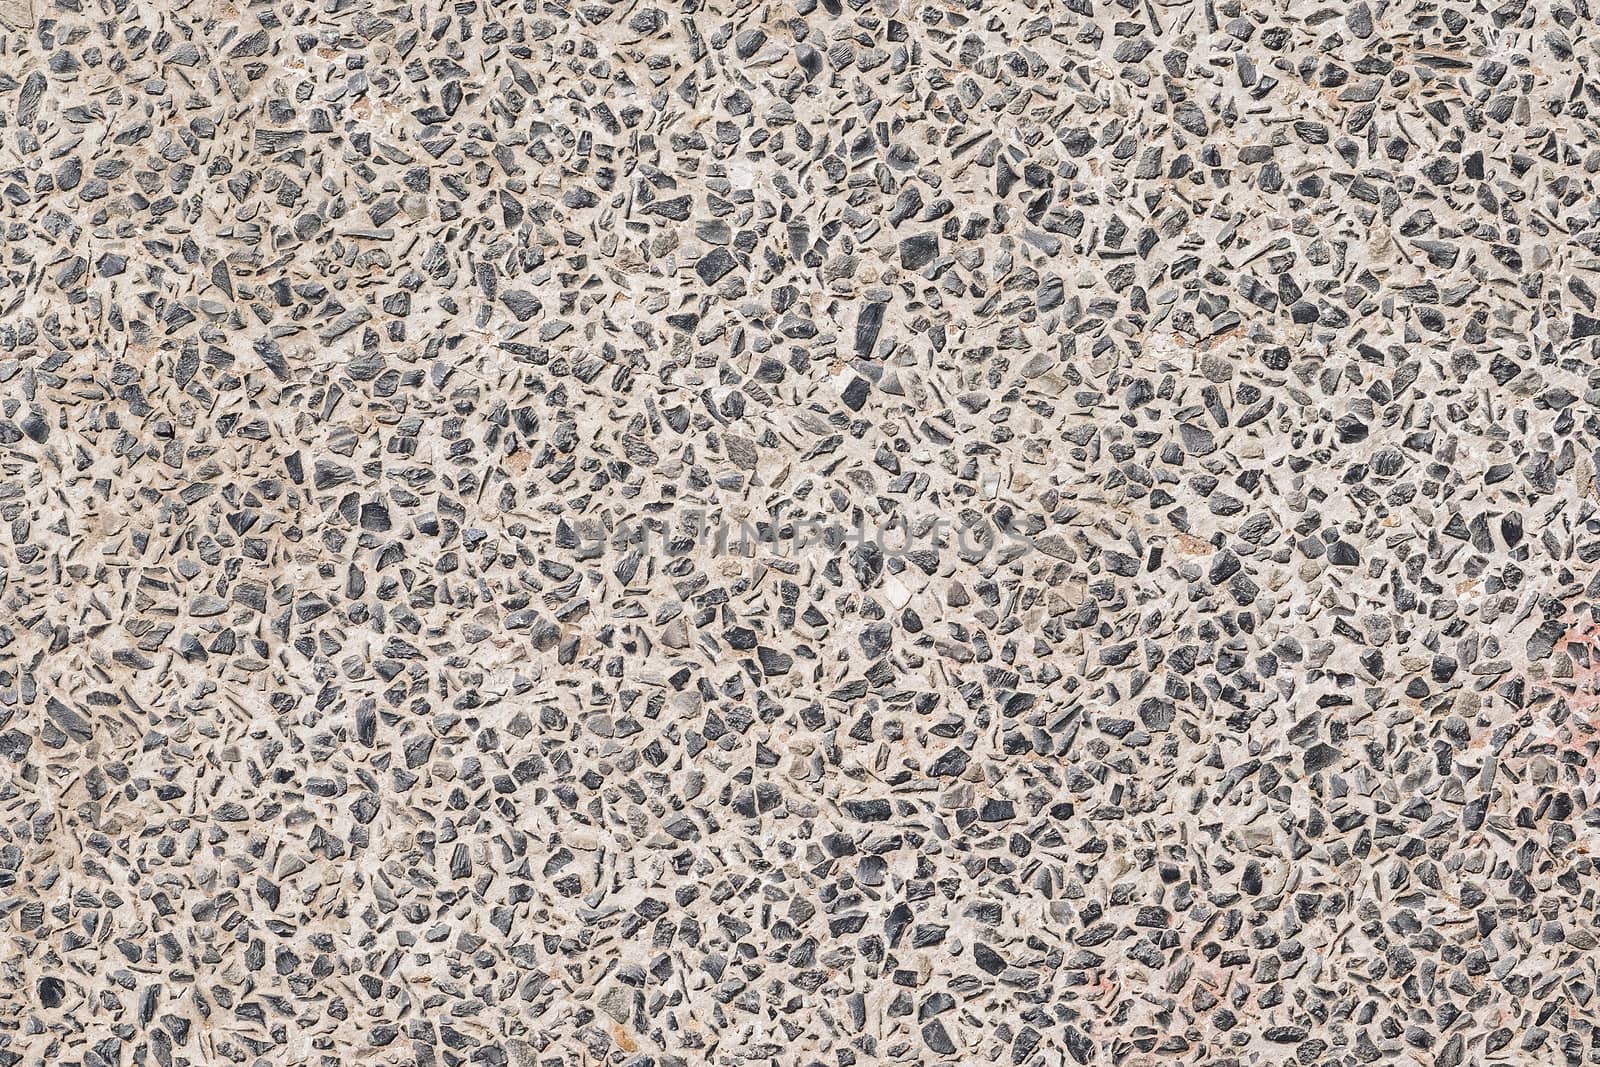 Stone background made of a closeup of a pile of pebbles by Surasak